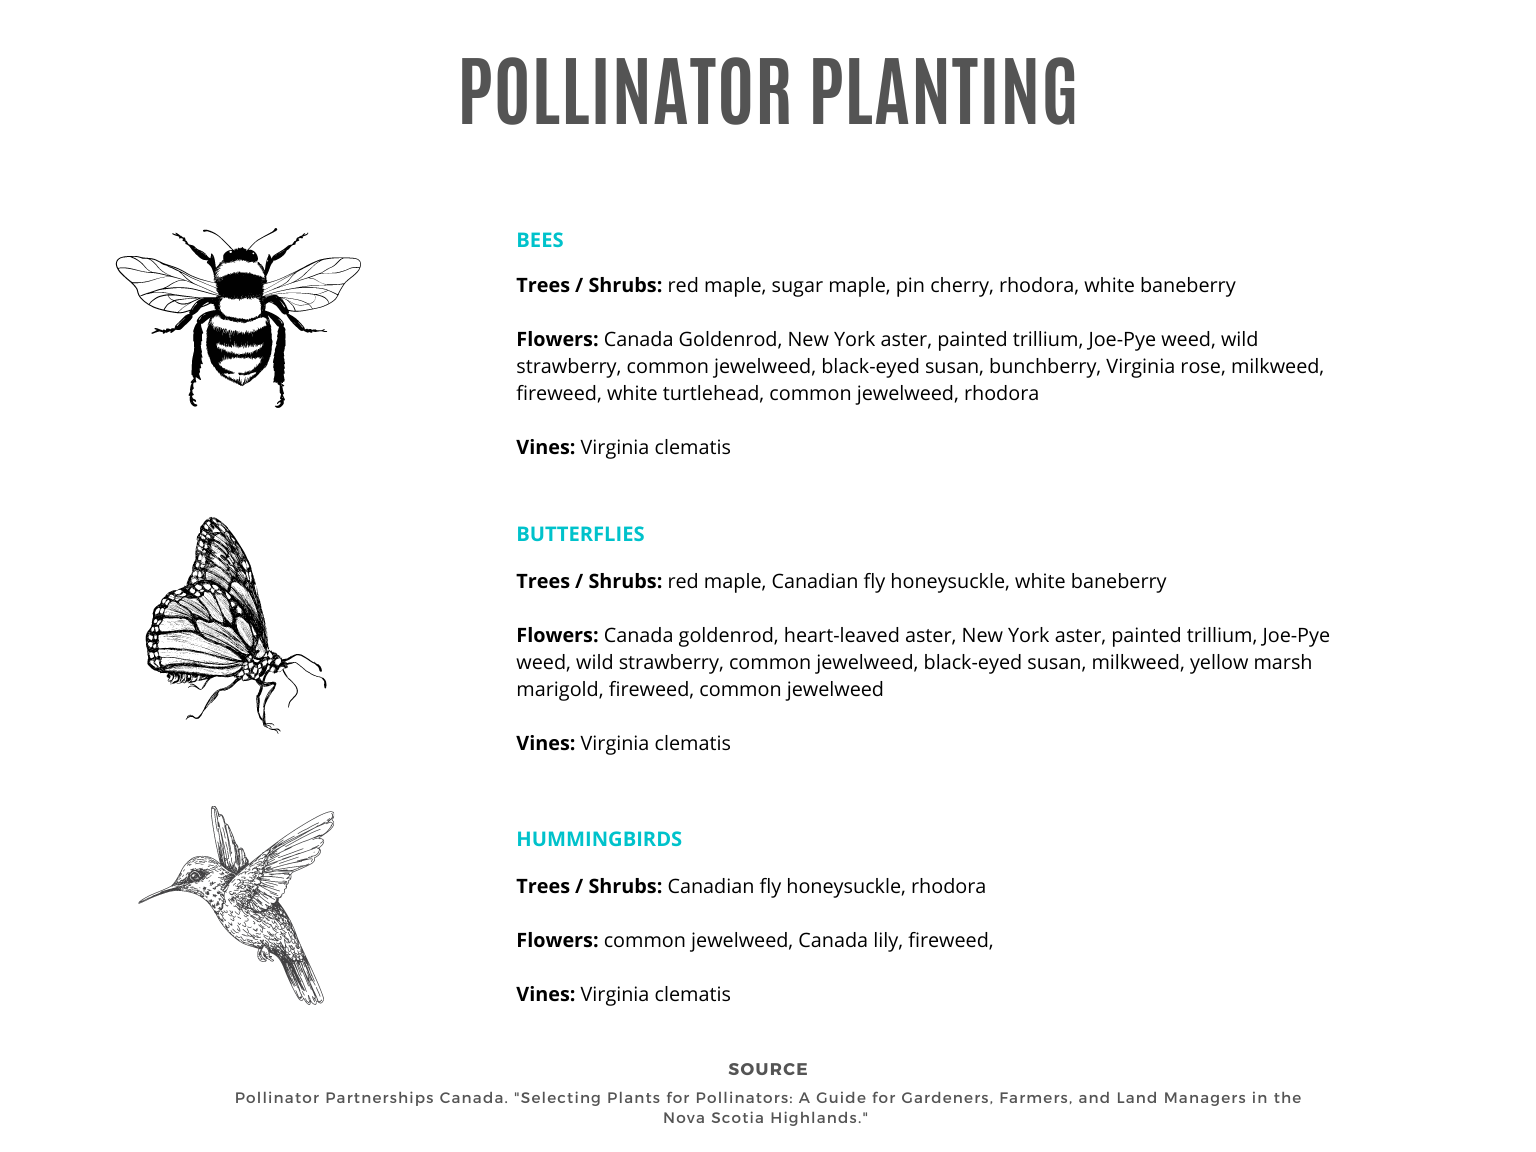 A guide to pollinator planting for bees, wasps, butterflies, moths, and birds.